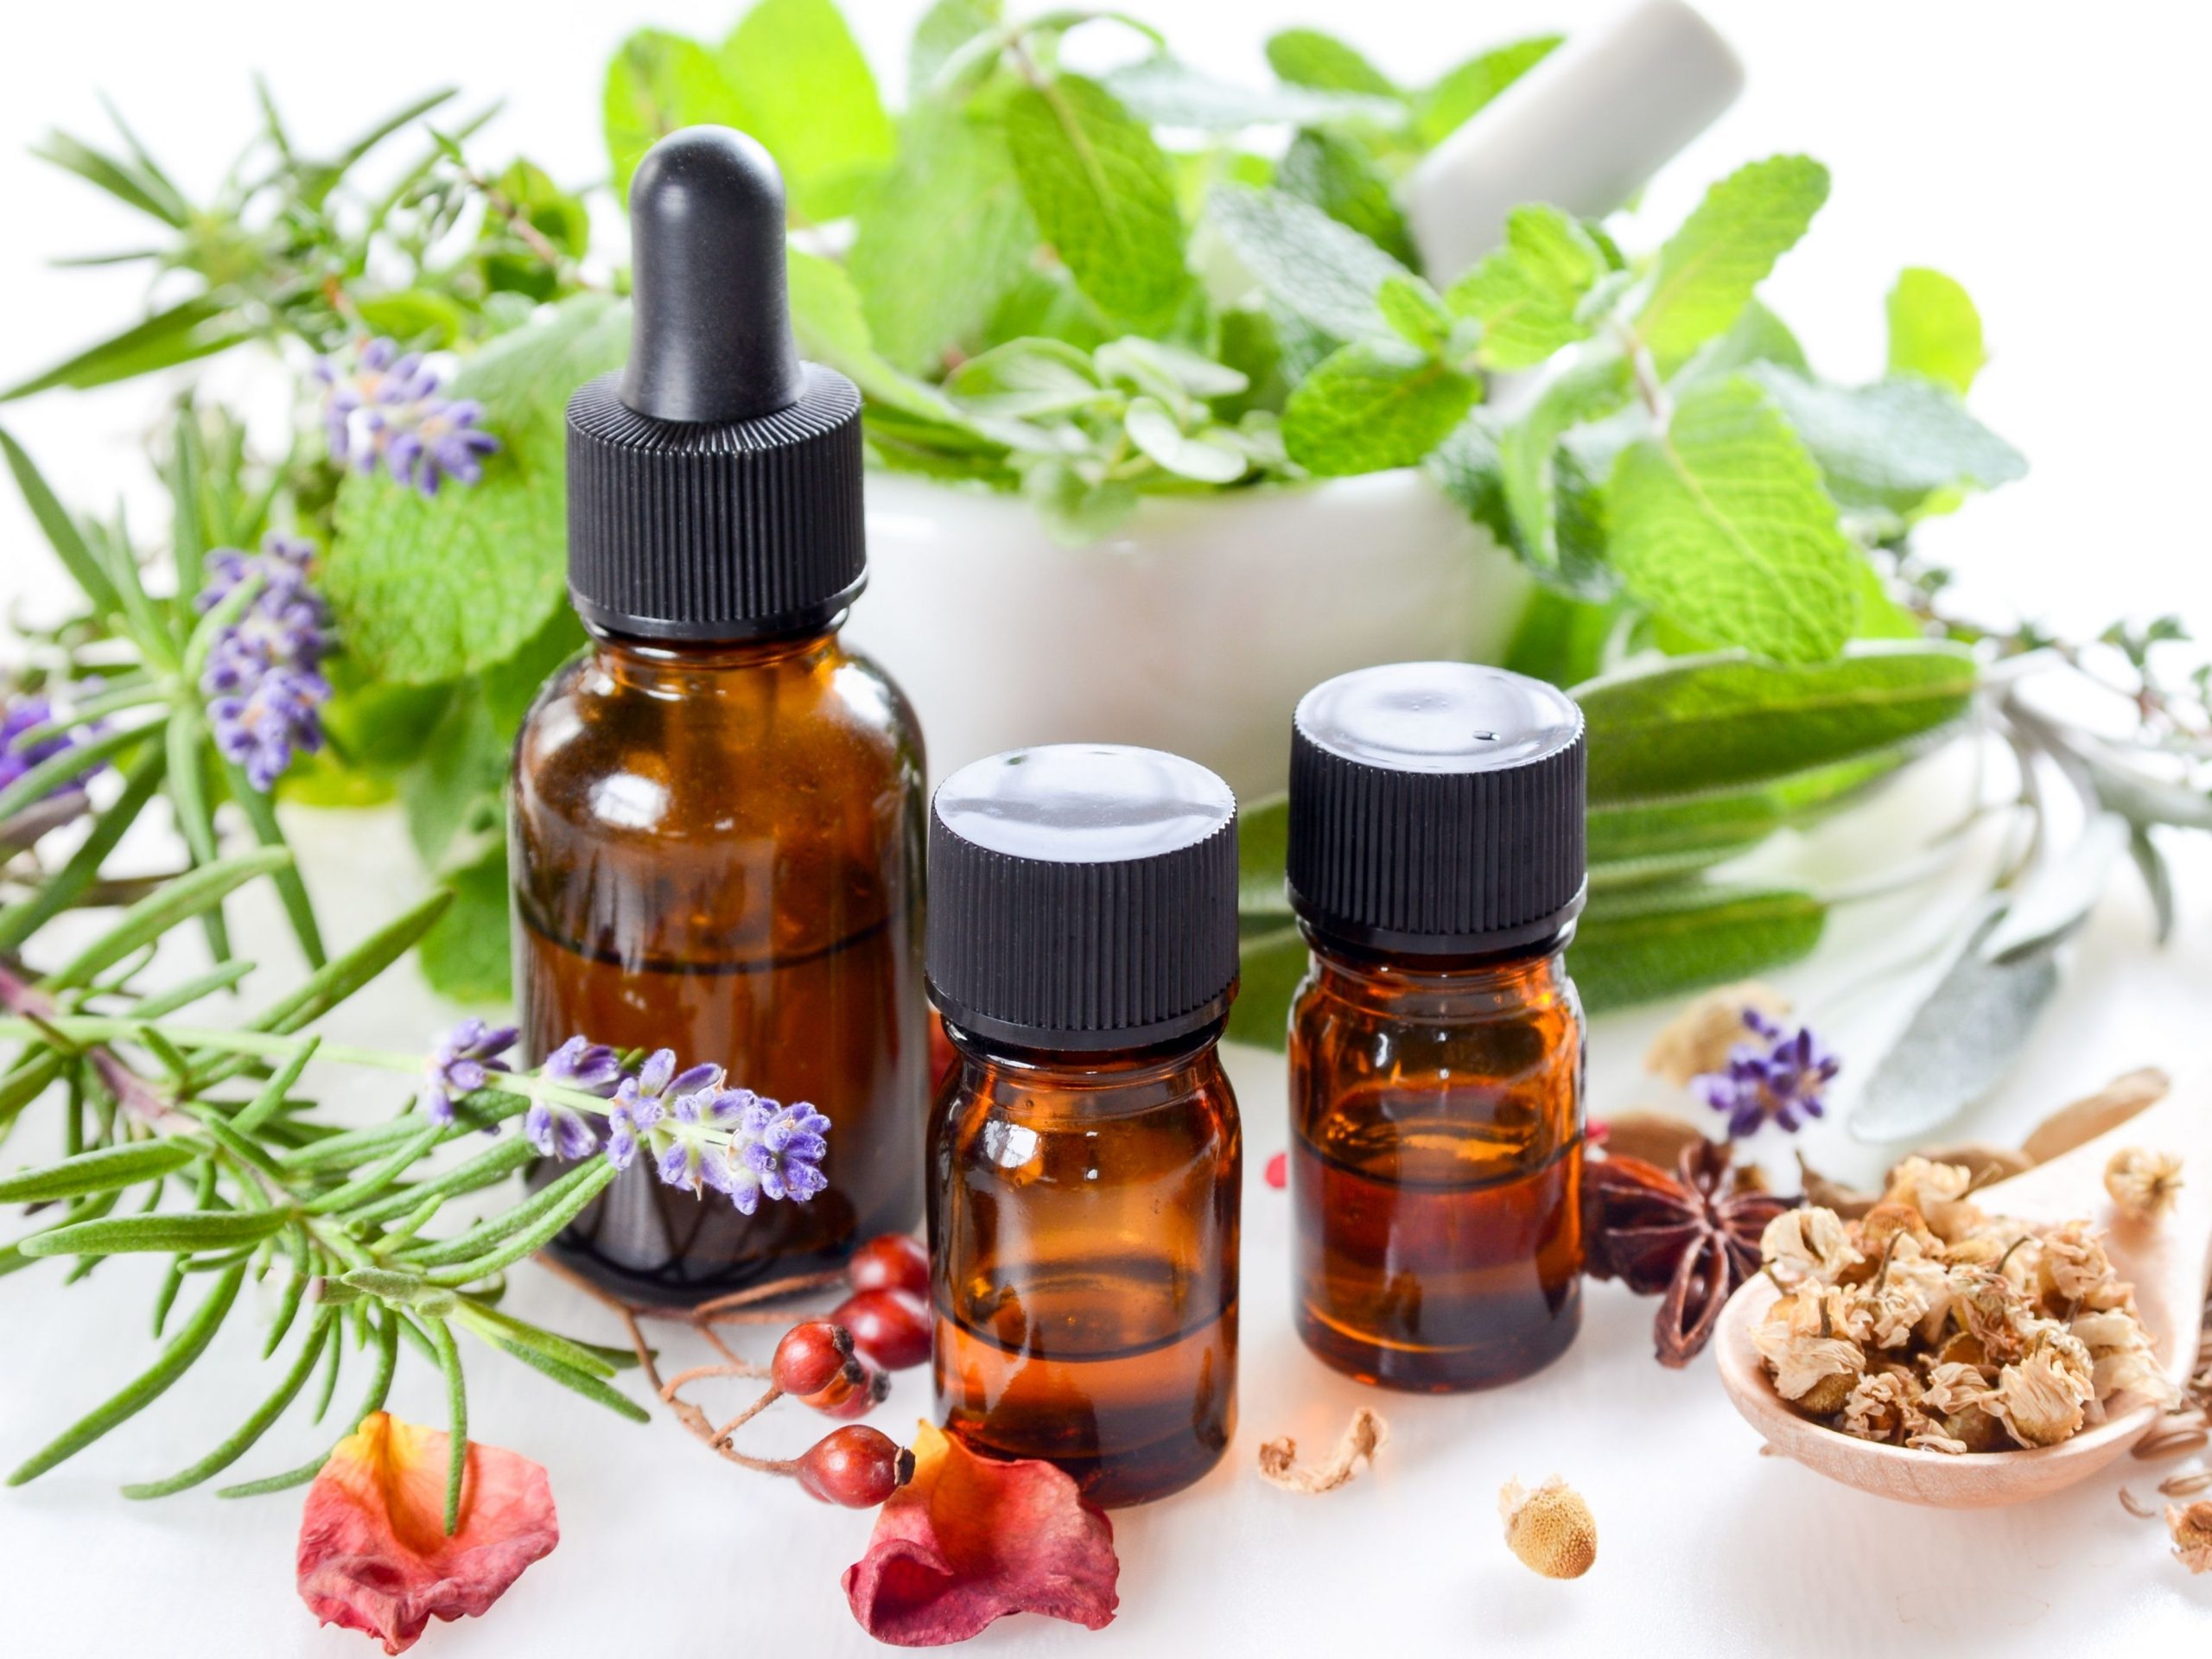 What is Aromatherapy massage?